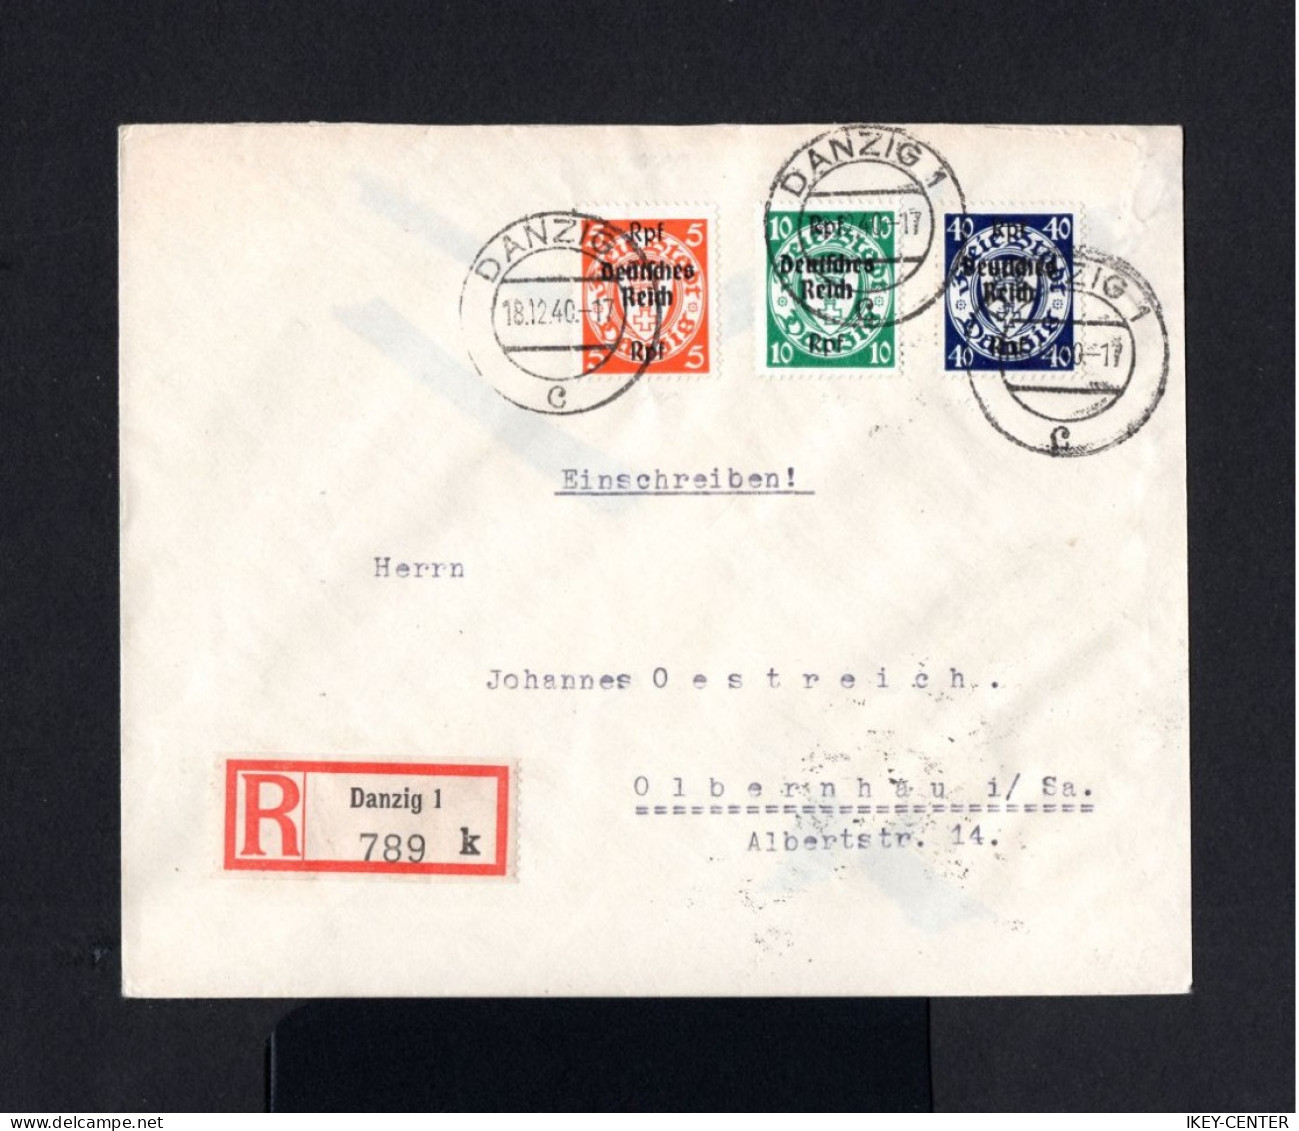 12439-GERMANY-DANZIG STATE.REGISTERED COVER DANZIG To OLBERNHAU.1940 WWII.DEUTSCHES REICH.Enveloppe RECOMMANDE - Lettres & Documents